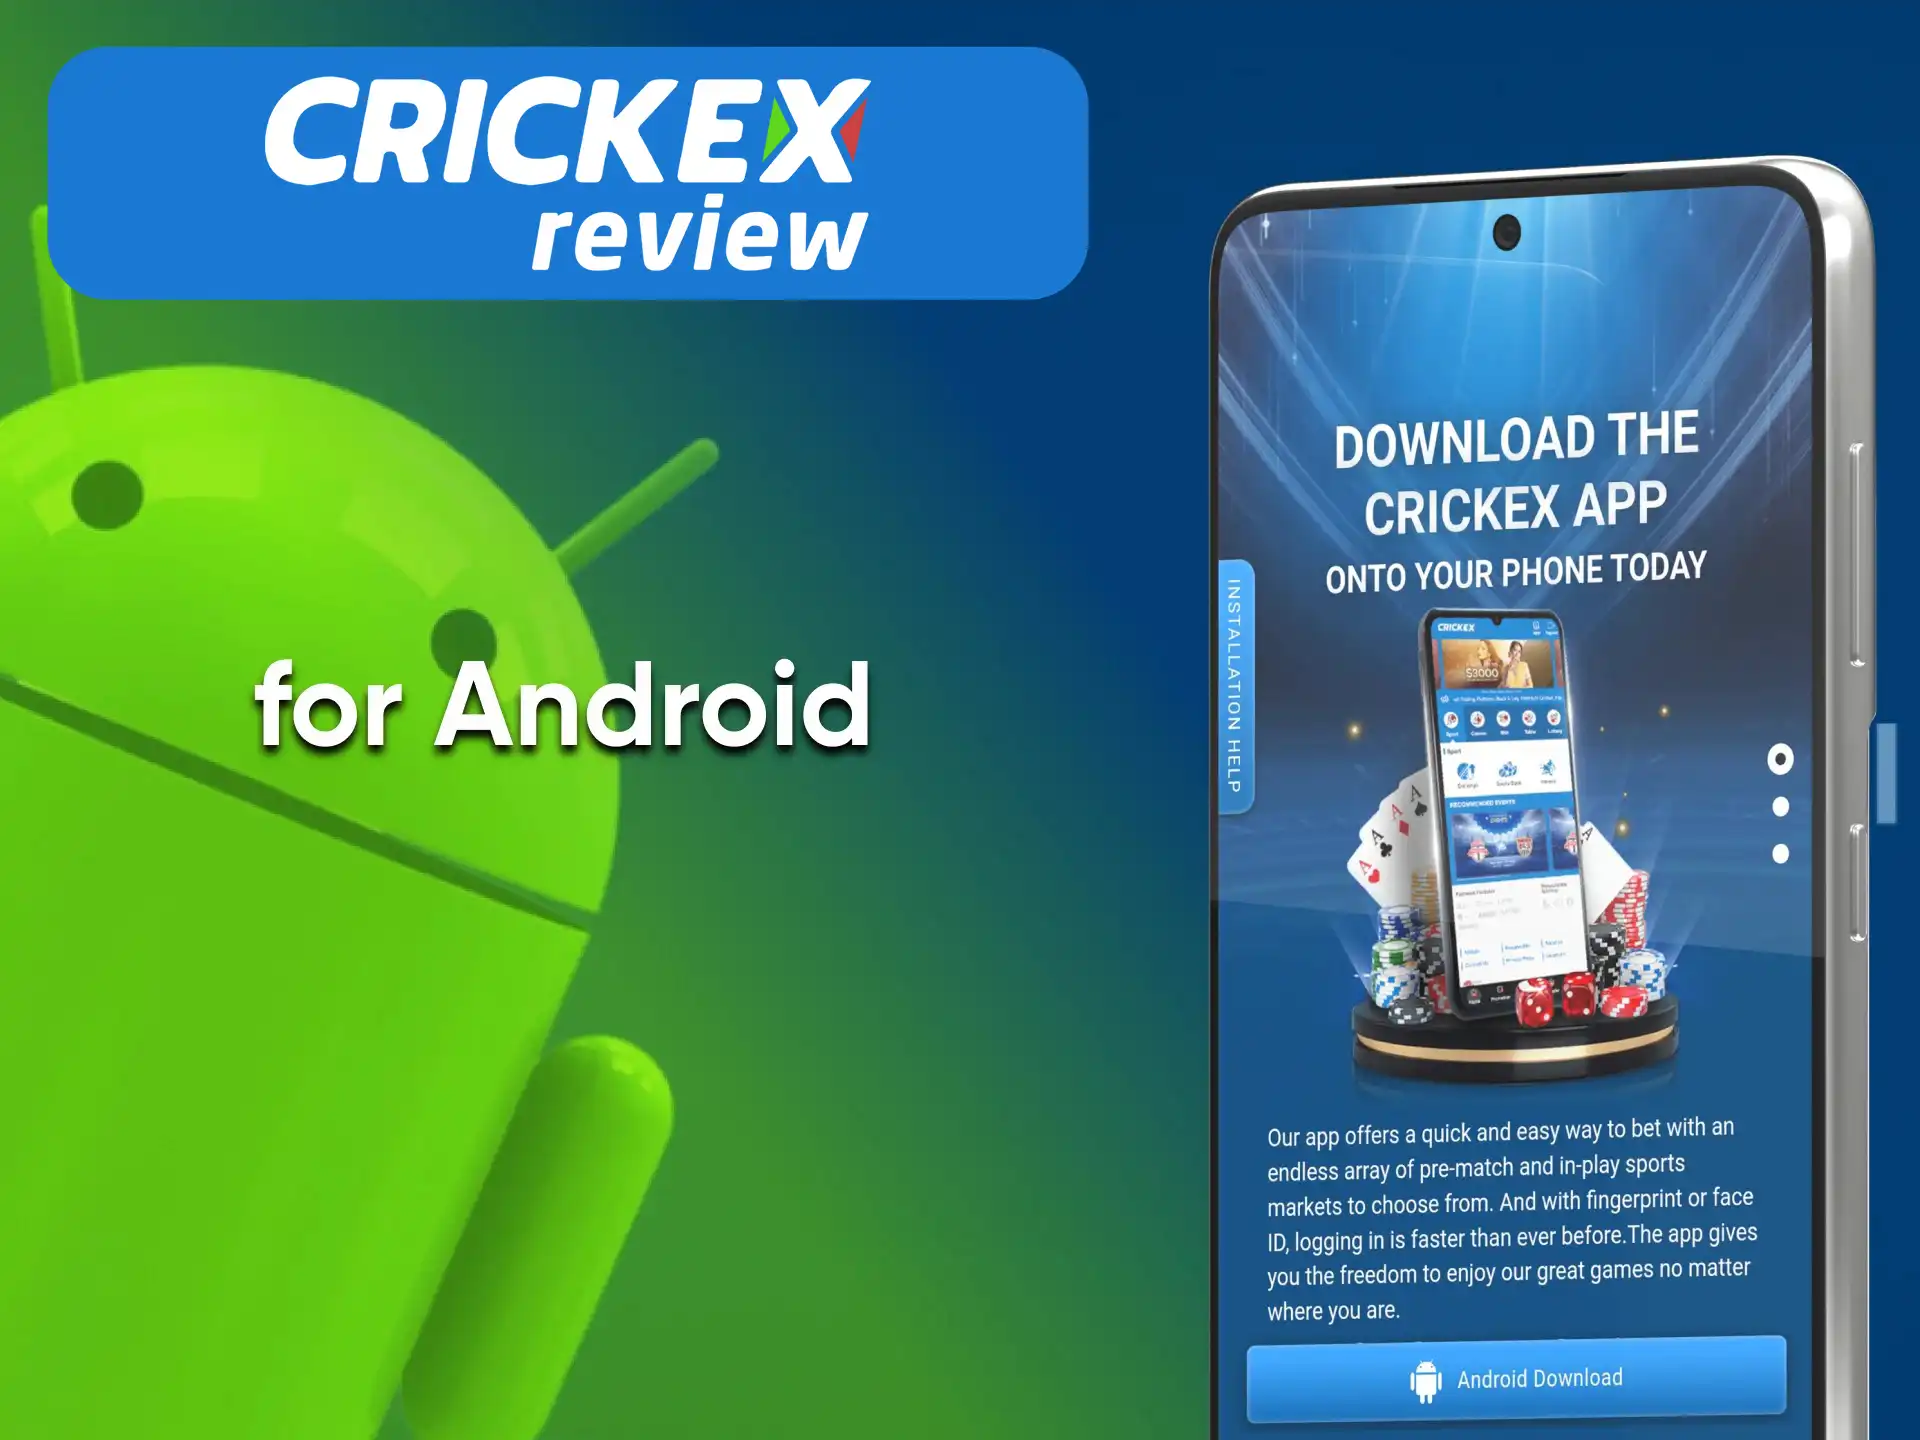 You can use Crickex by downloading the app.